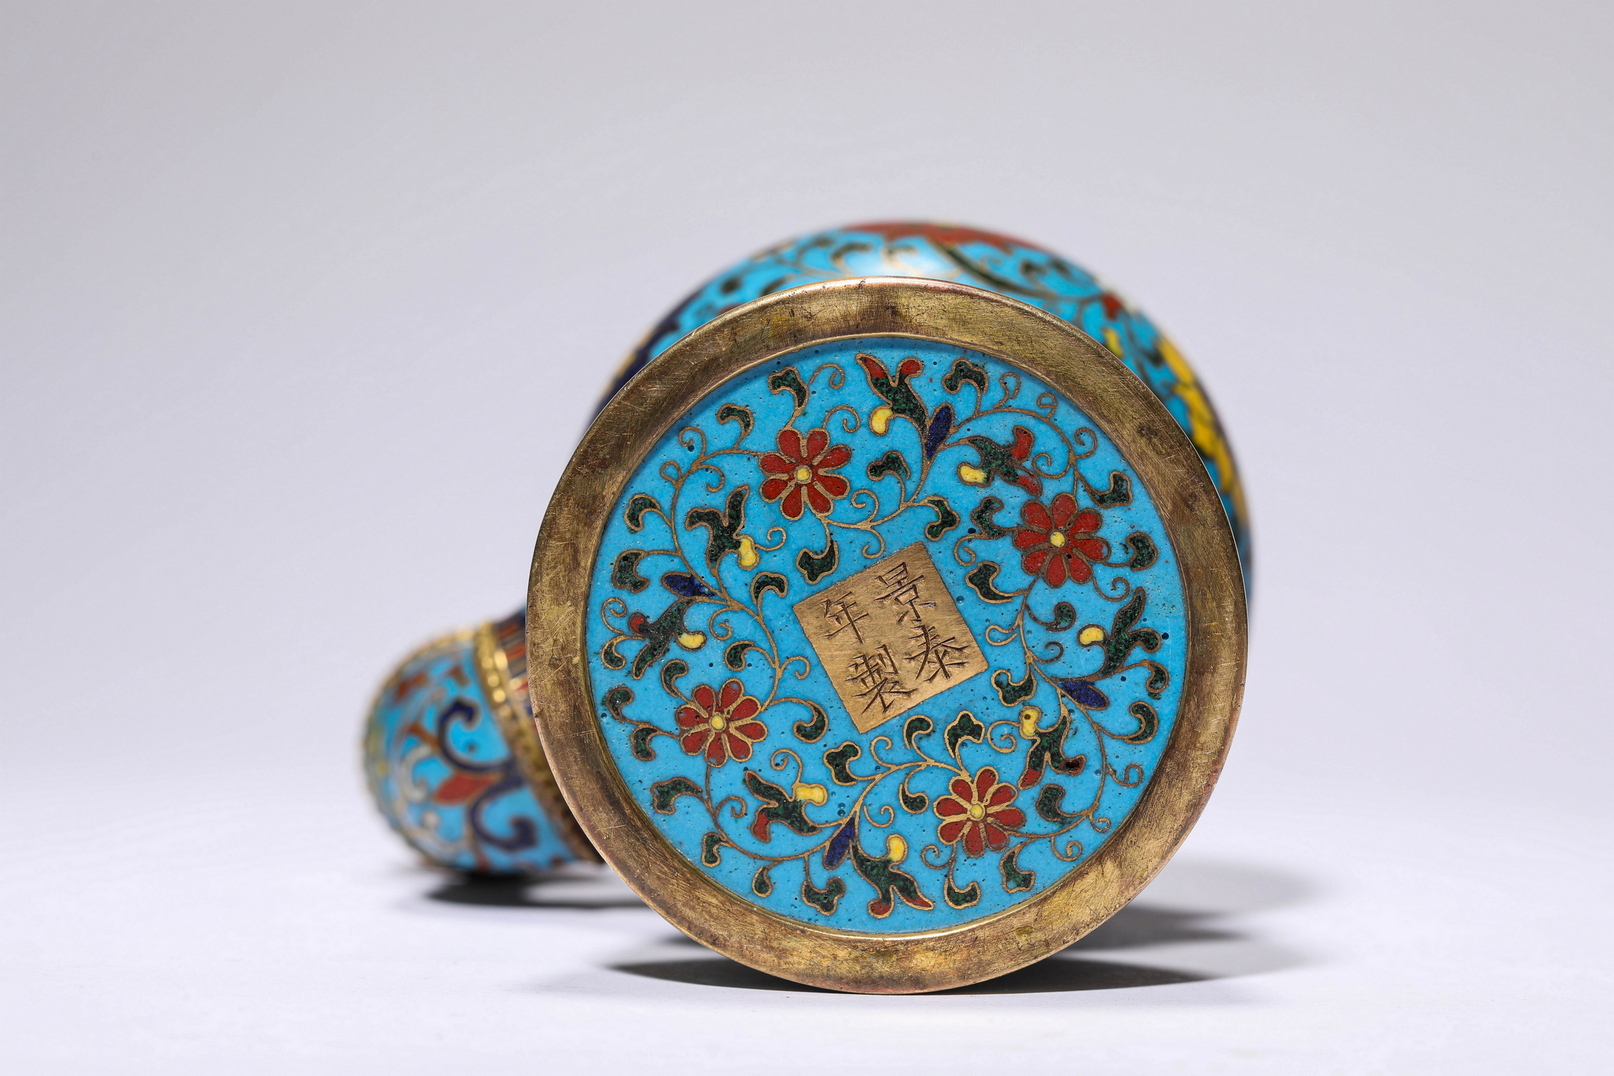 FINE CHINESE CLOISONNE, 17TH/18TH Century Pr.  Collection of NARA private gallary.  - Image 6 of 6